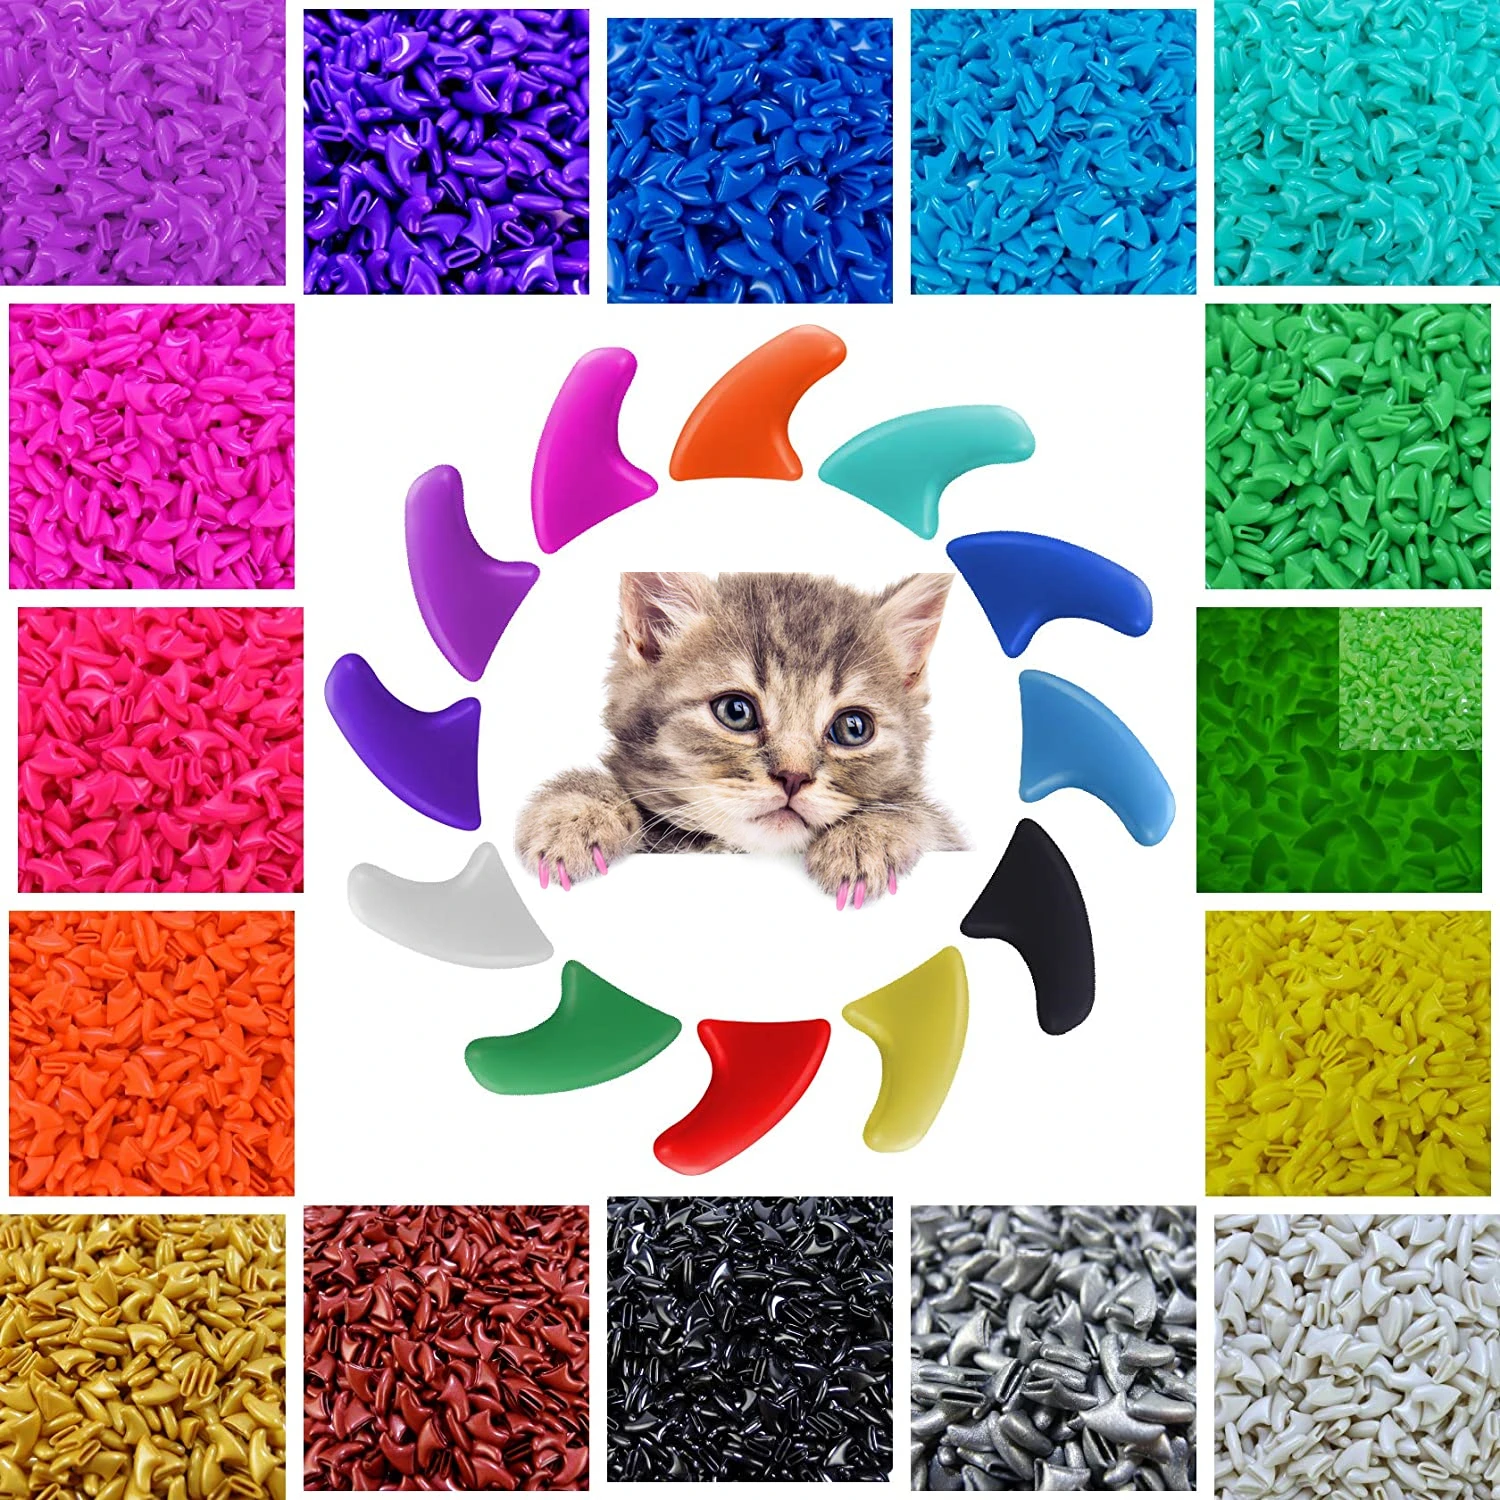 New FASHION colorful Cat Nail Caps soft cat Claw Soft Paws 20 PCS/lot with free Adhesive Glue Size XS S M LGift for pet